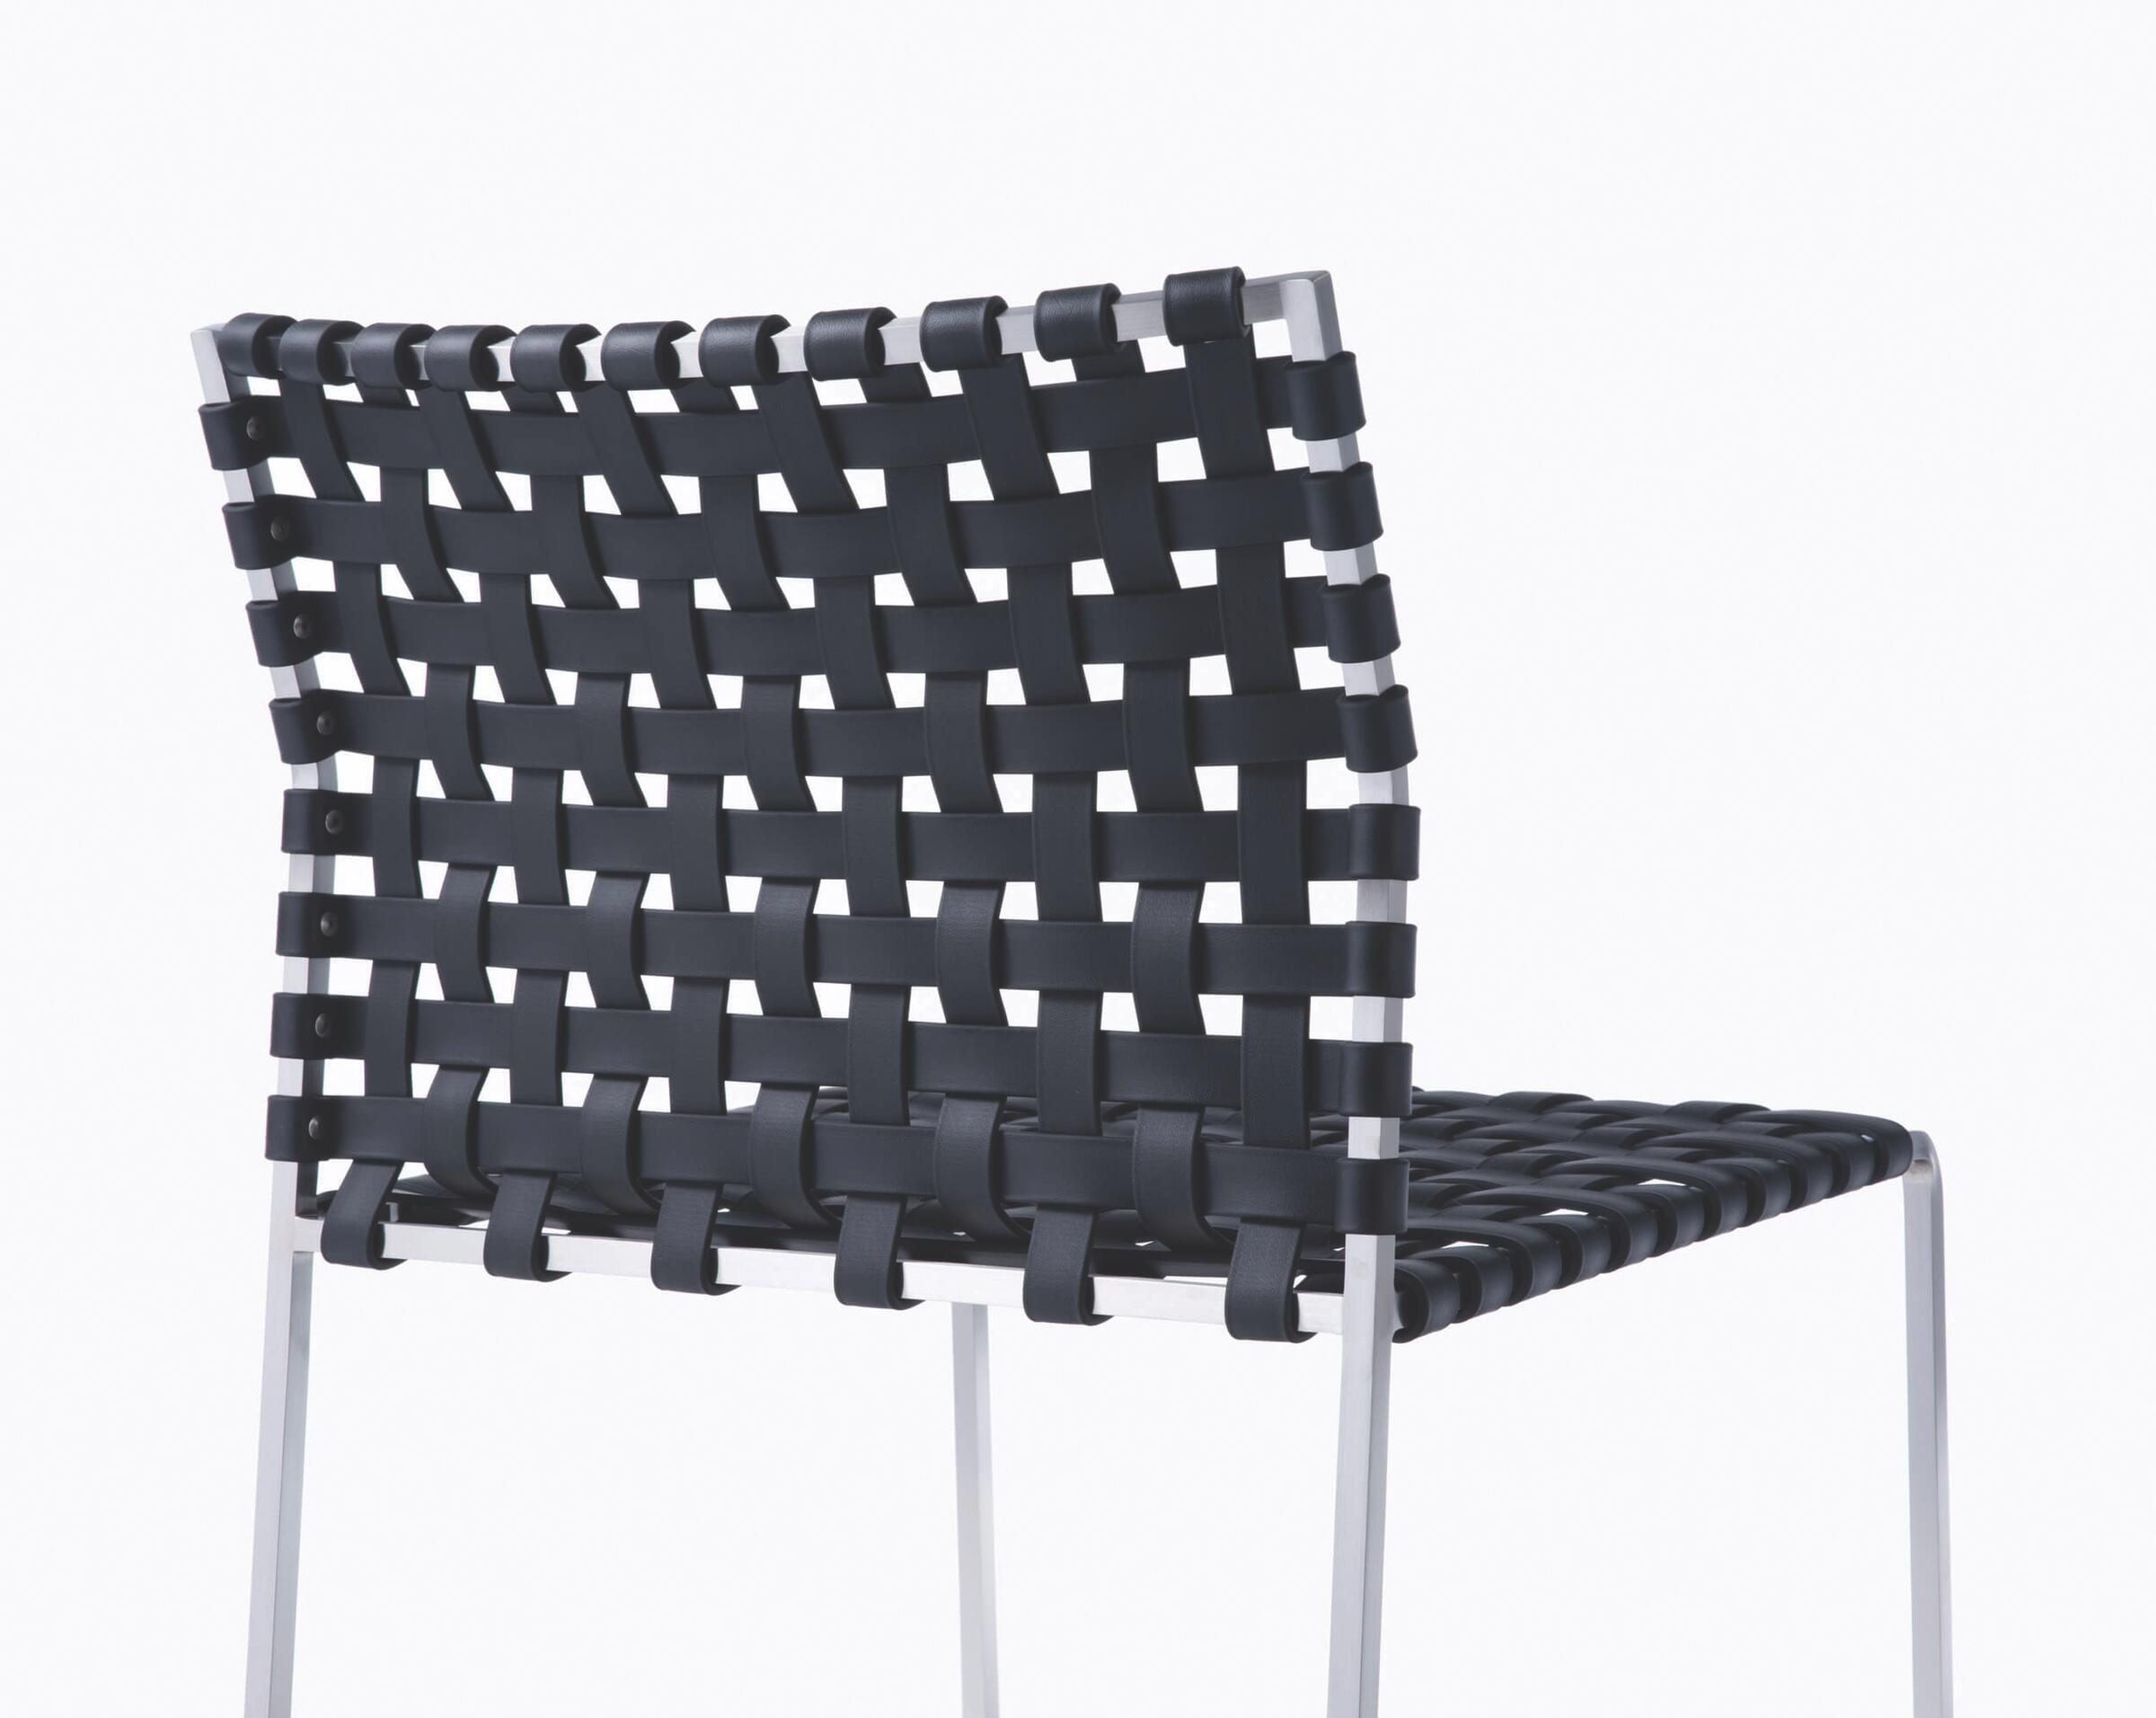 Outdoor Side Chair